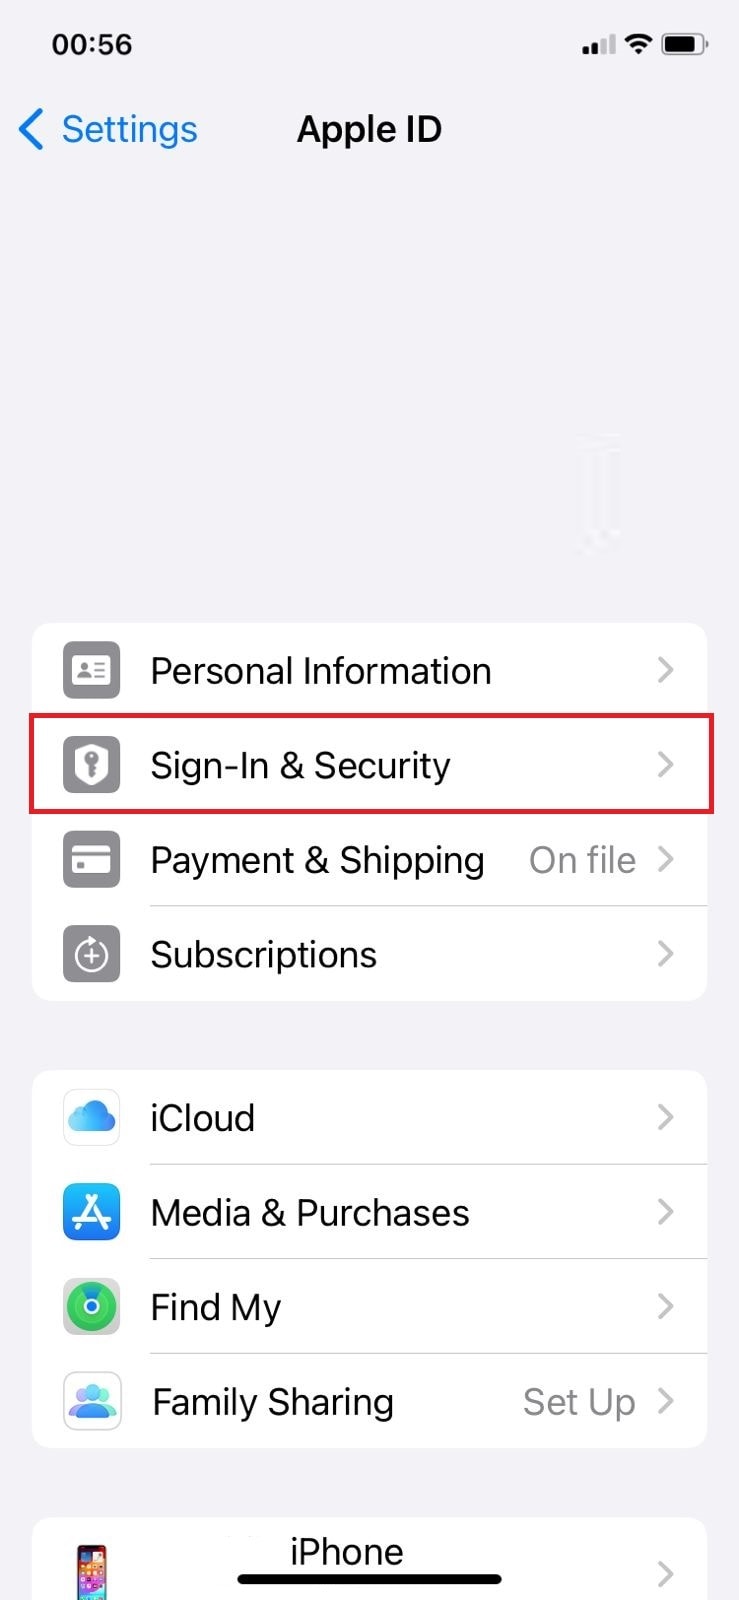 Select Sign-in and Security